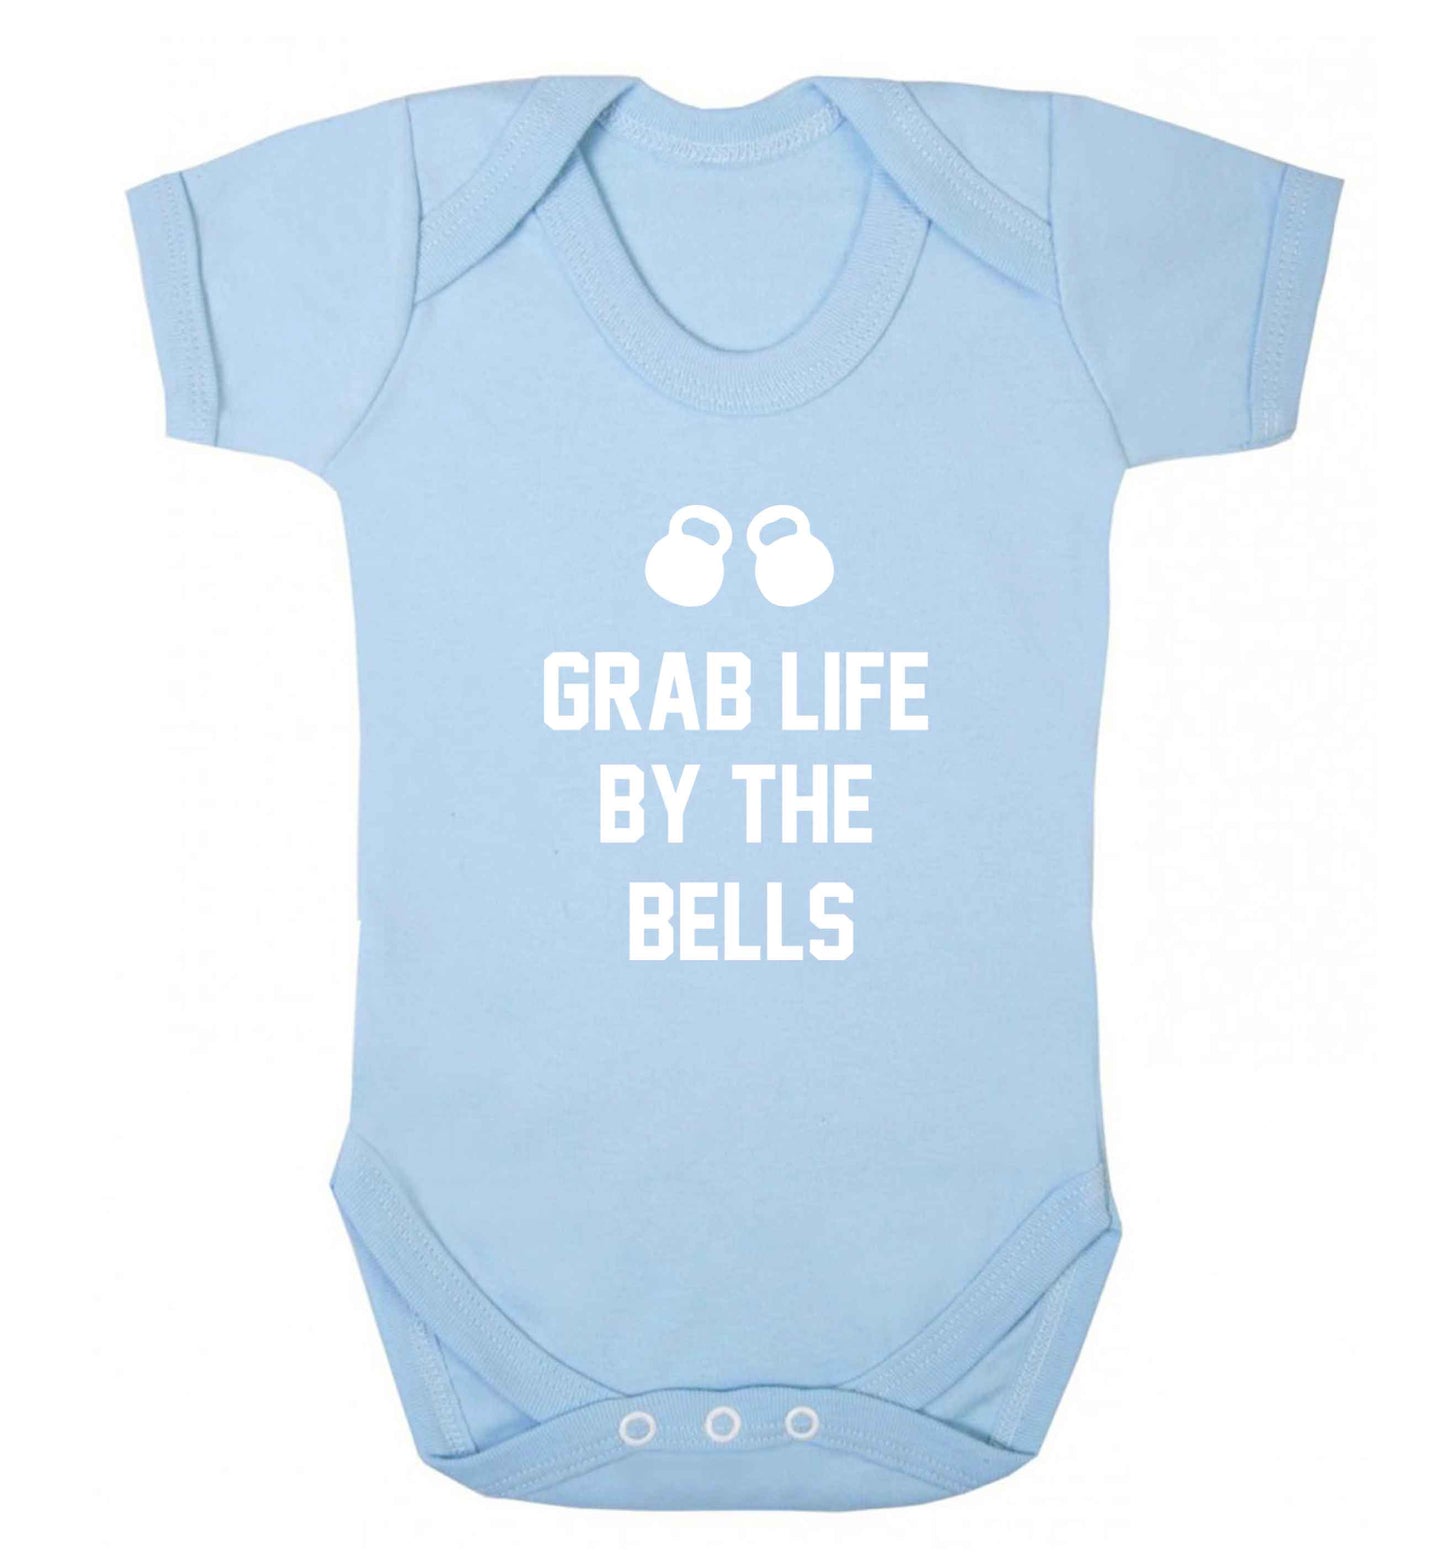 Grab life by the bells baby vest pale blue 18-24 months